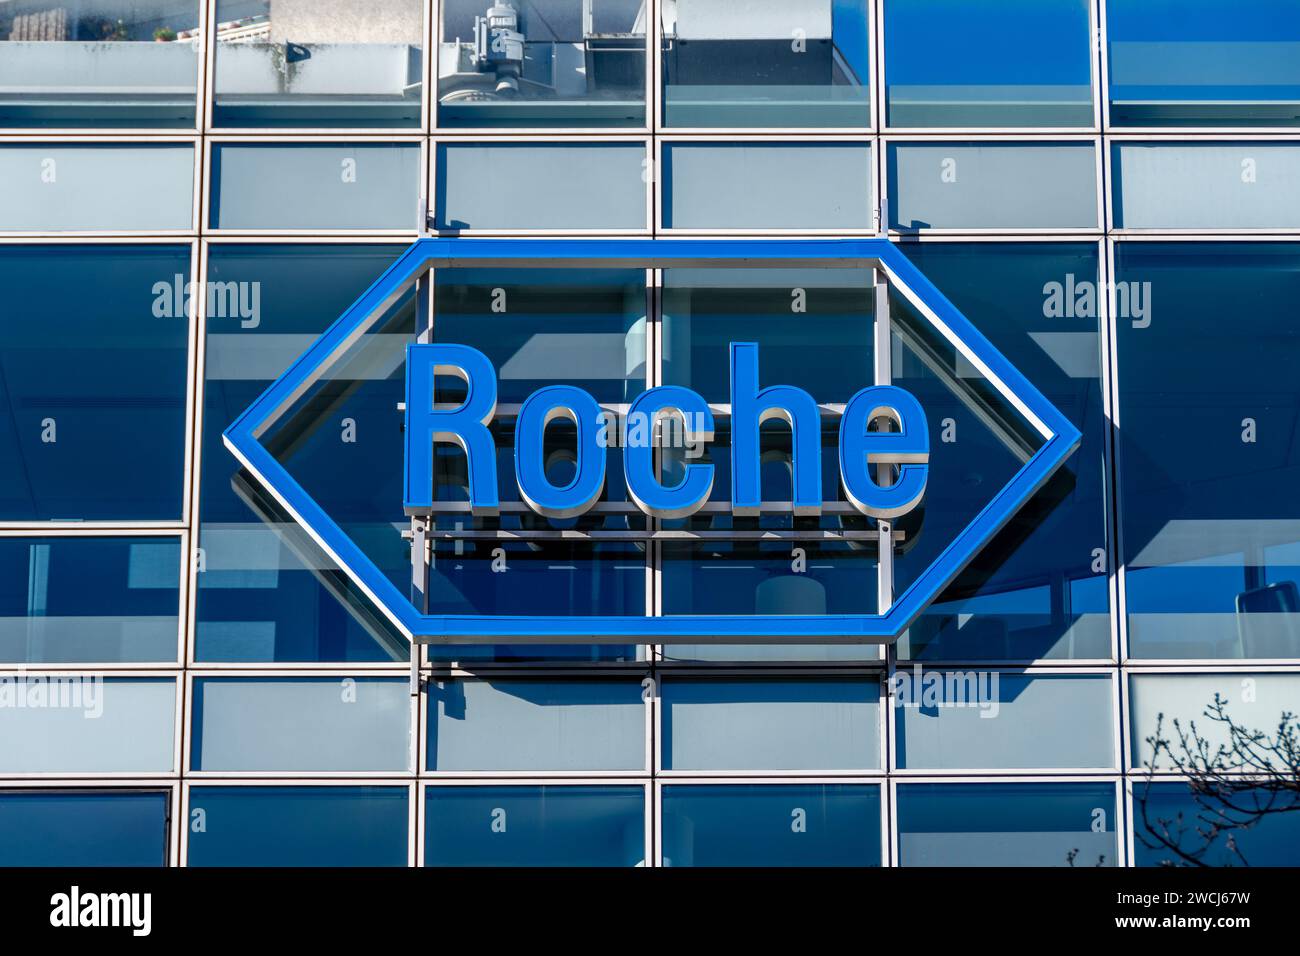 Sign and logo on the building housing the headquarters of Roche France, French subsidiary of the Swiss pharmaceutical group F. Hoffmann-La Roche Stock Photo